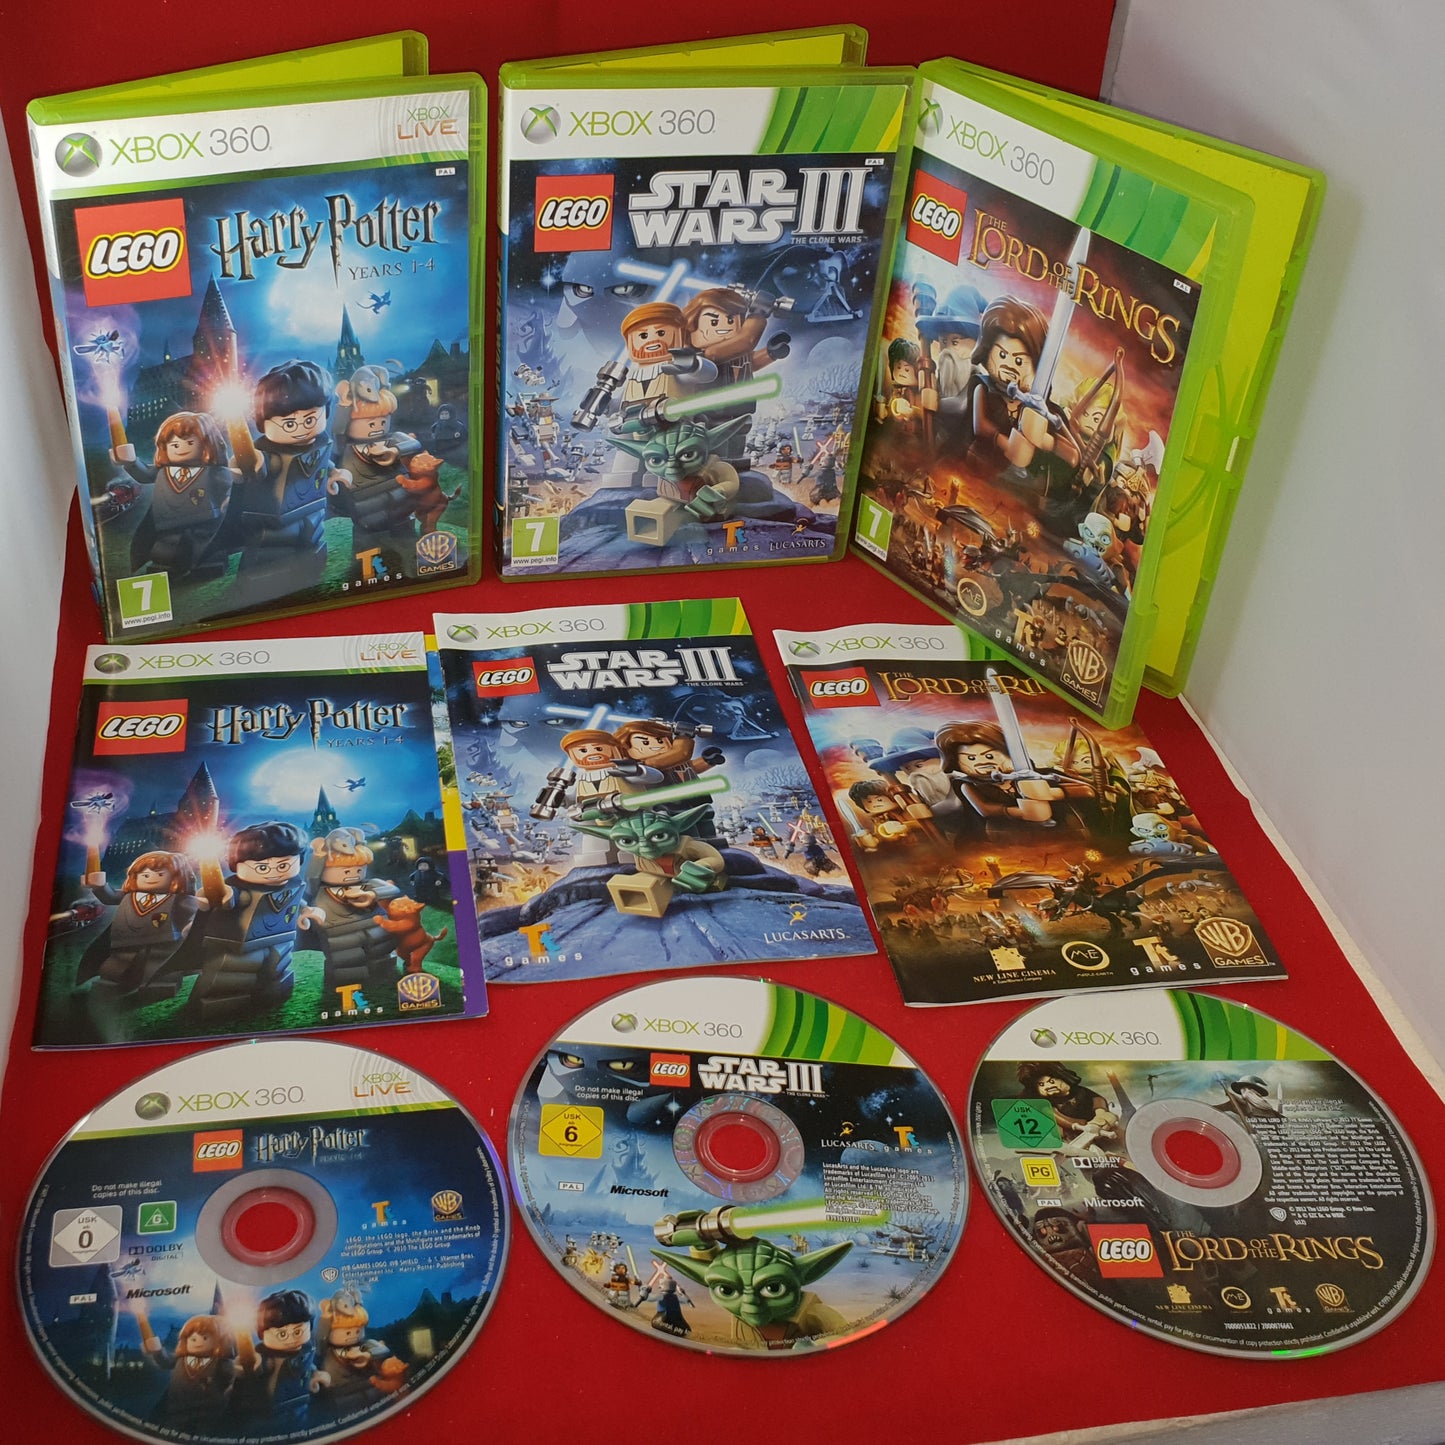 Lego Lord of the Rings, Star Wars III & Harry Potter 1-4 Xbox 360 Game Bundle